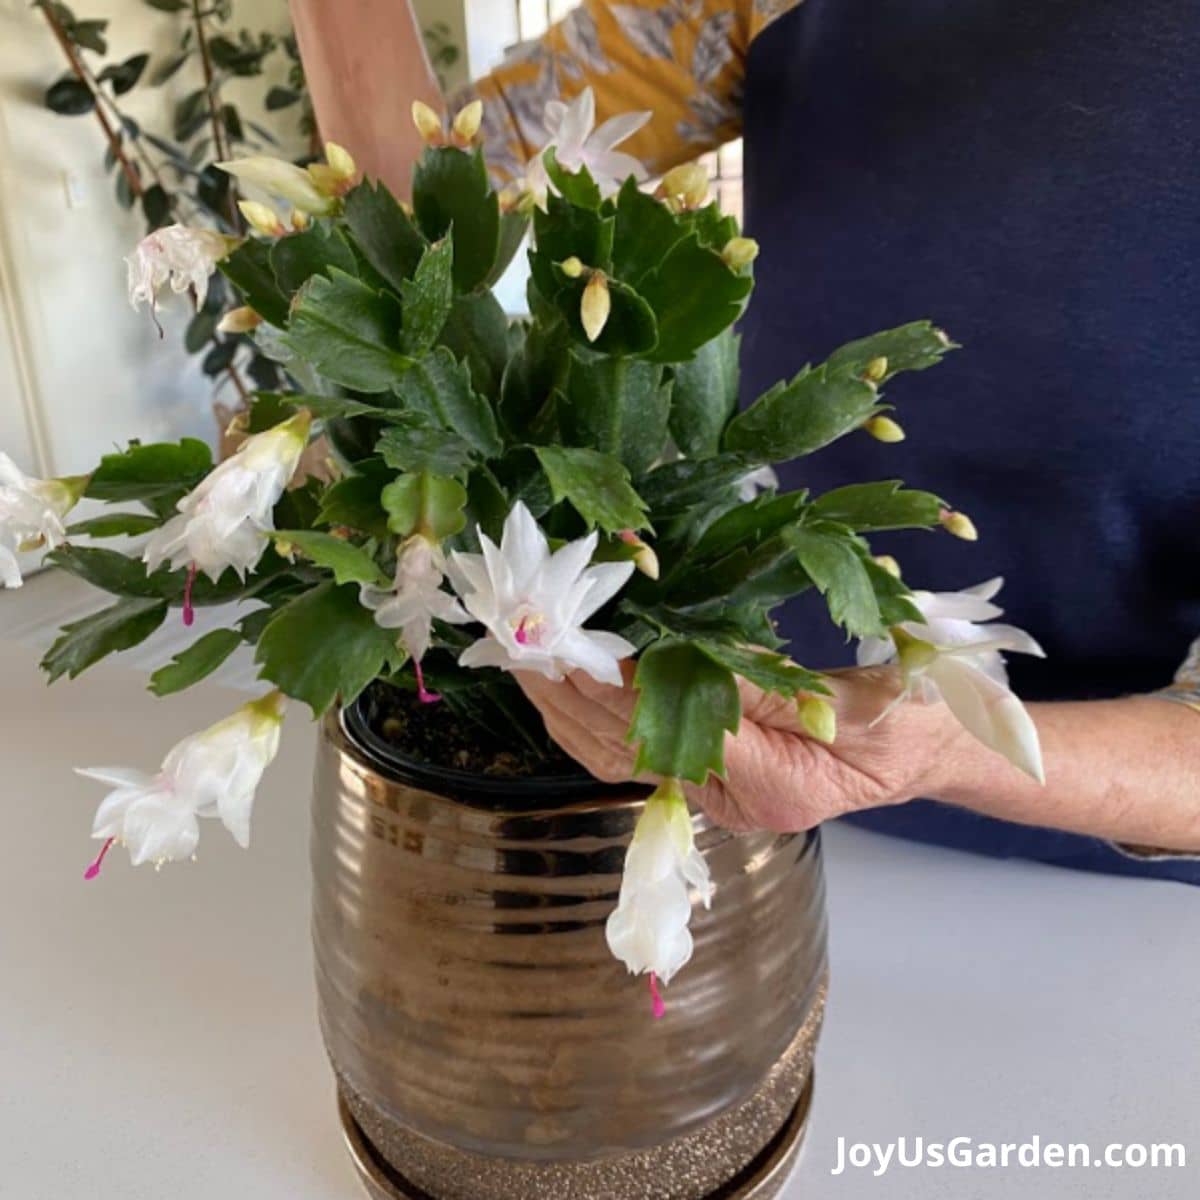 Woman's hand shown holding up the foliage and blooms of a christmas cactus in copper pot.